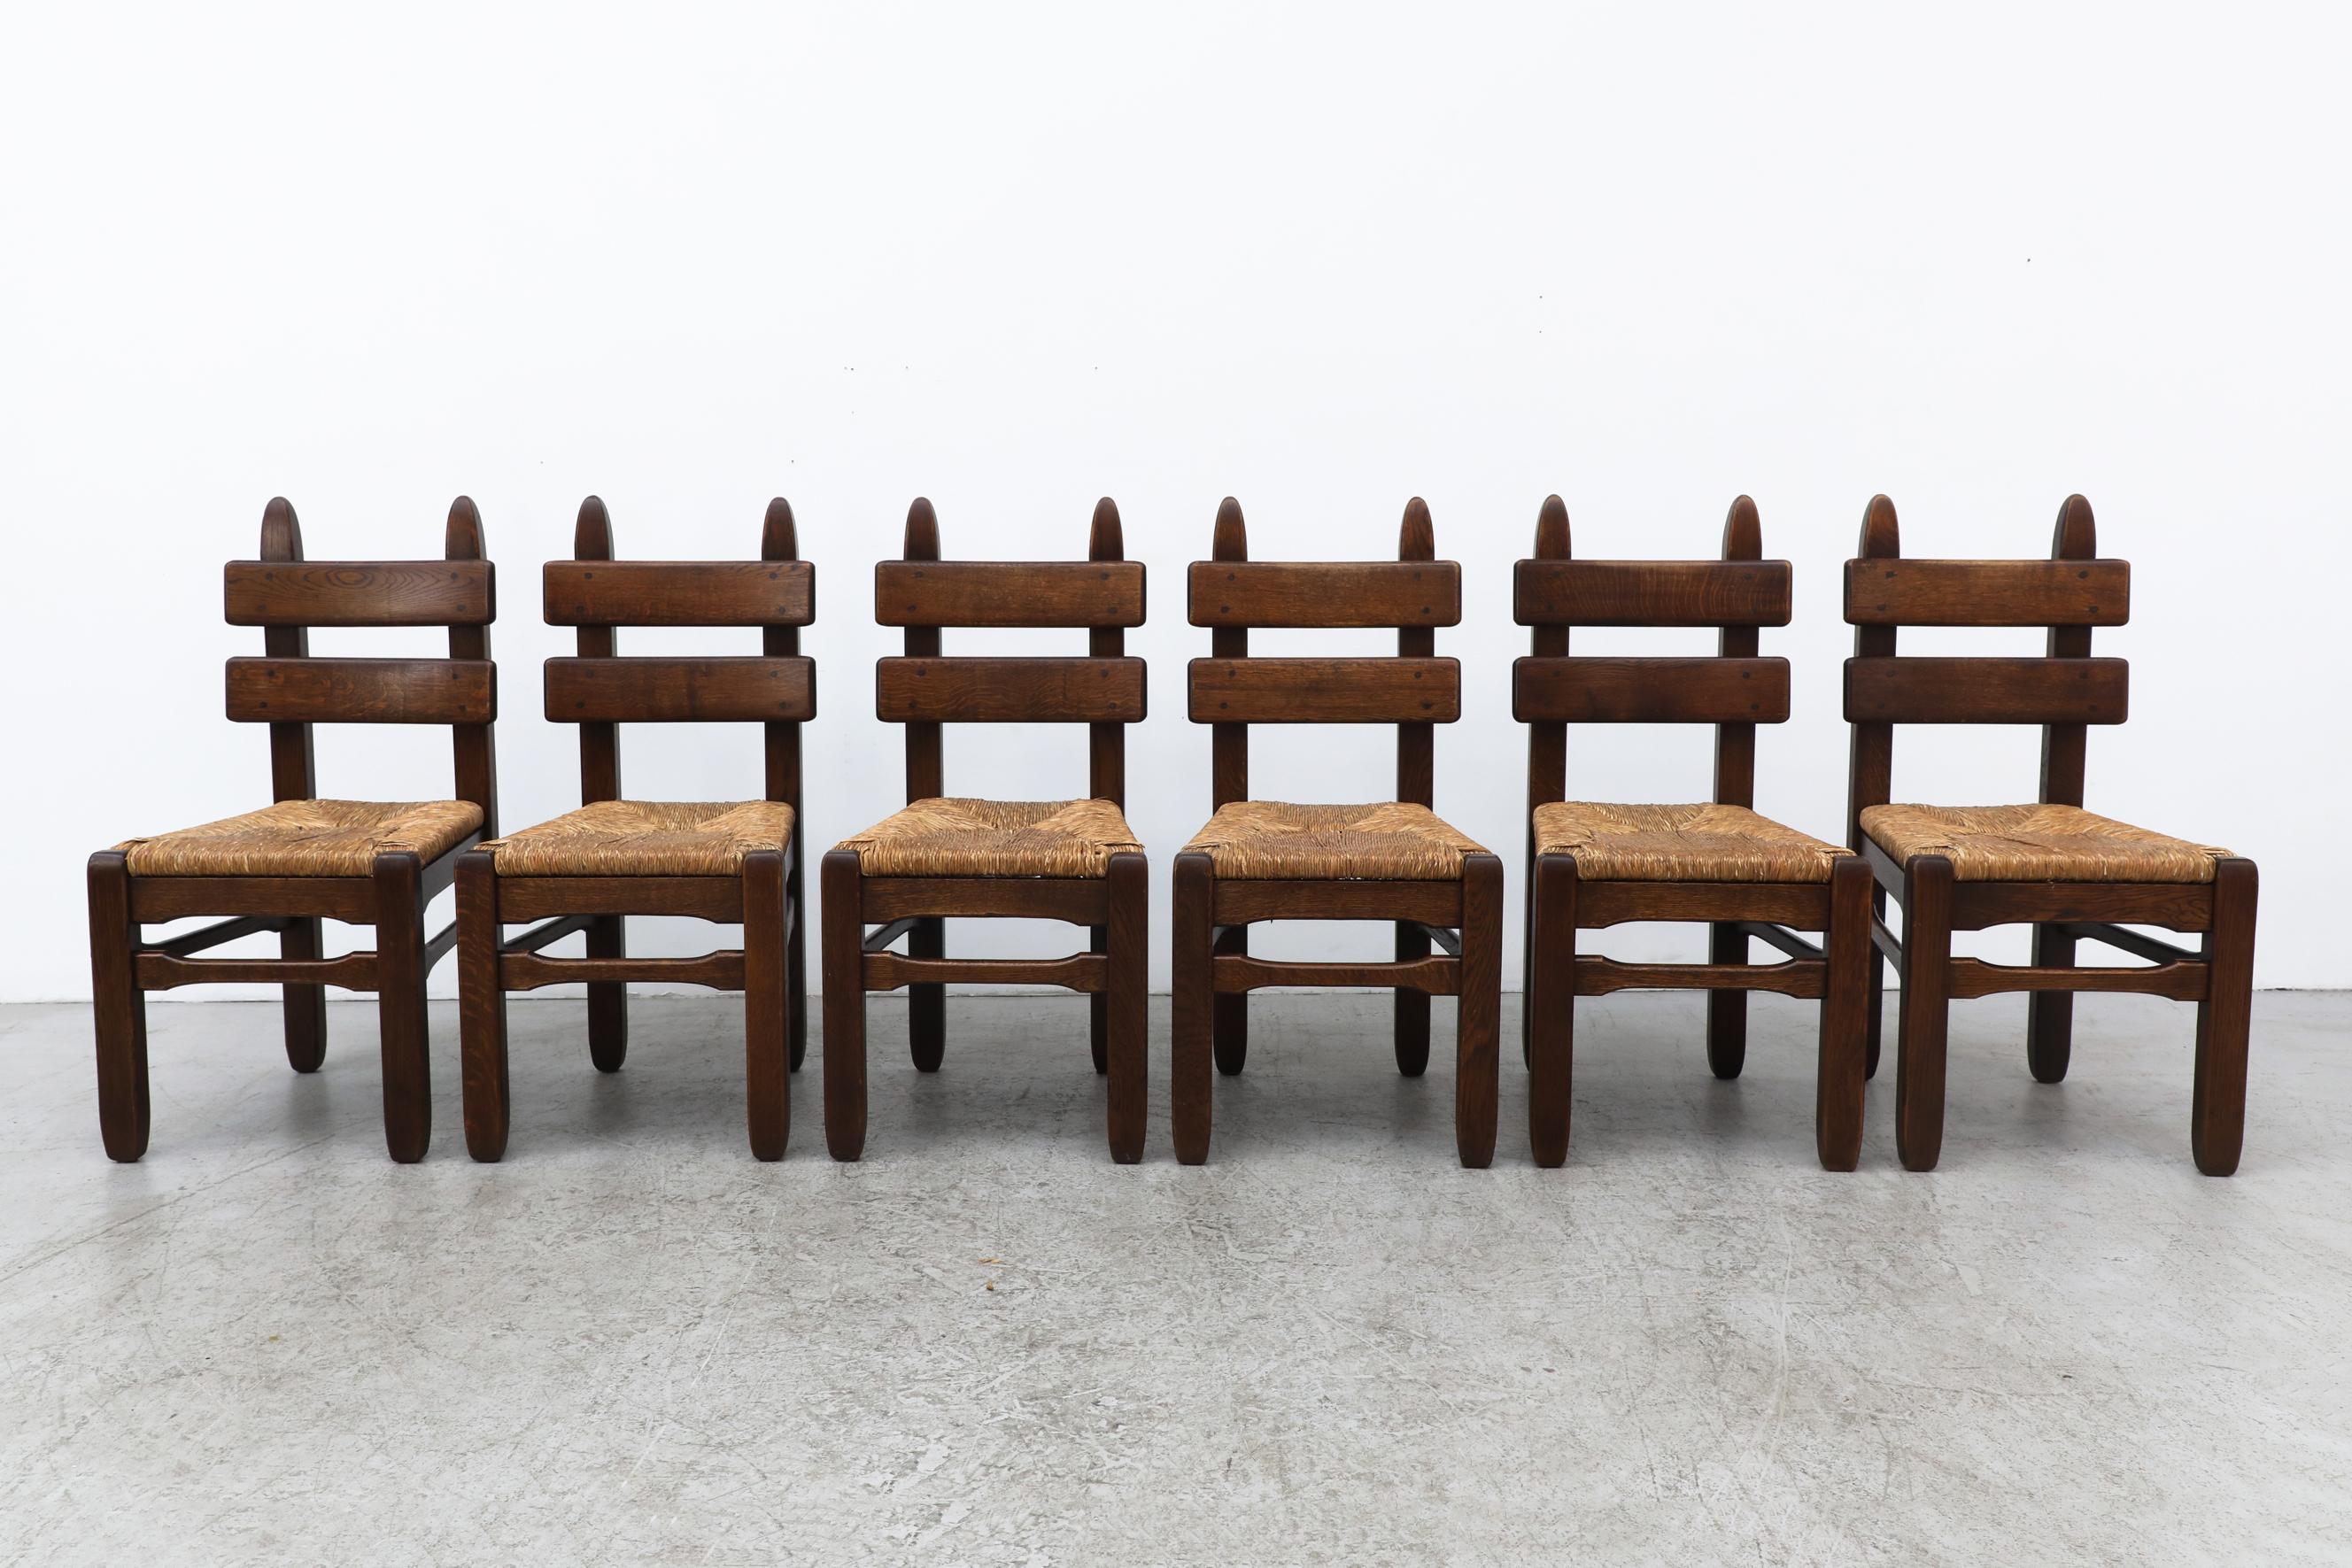 De Puydt brutalist ladder back dining chairs with rush seating. These chairs have heavy dark oak frames with woven rush seats. In original condition with a handsome patina and visible wear. There is some rush breakage on a few seats. with wear